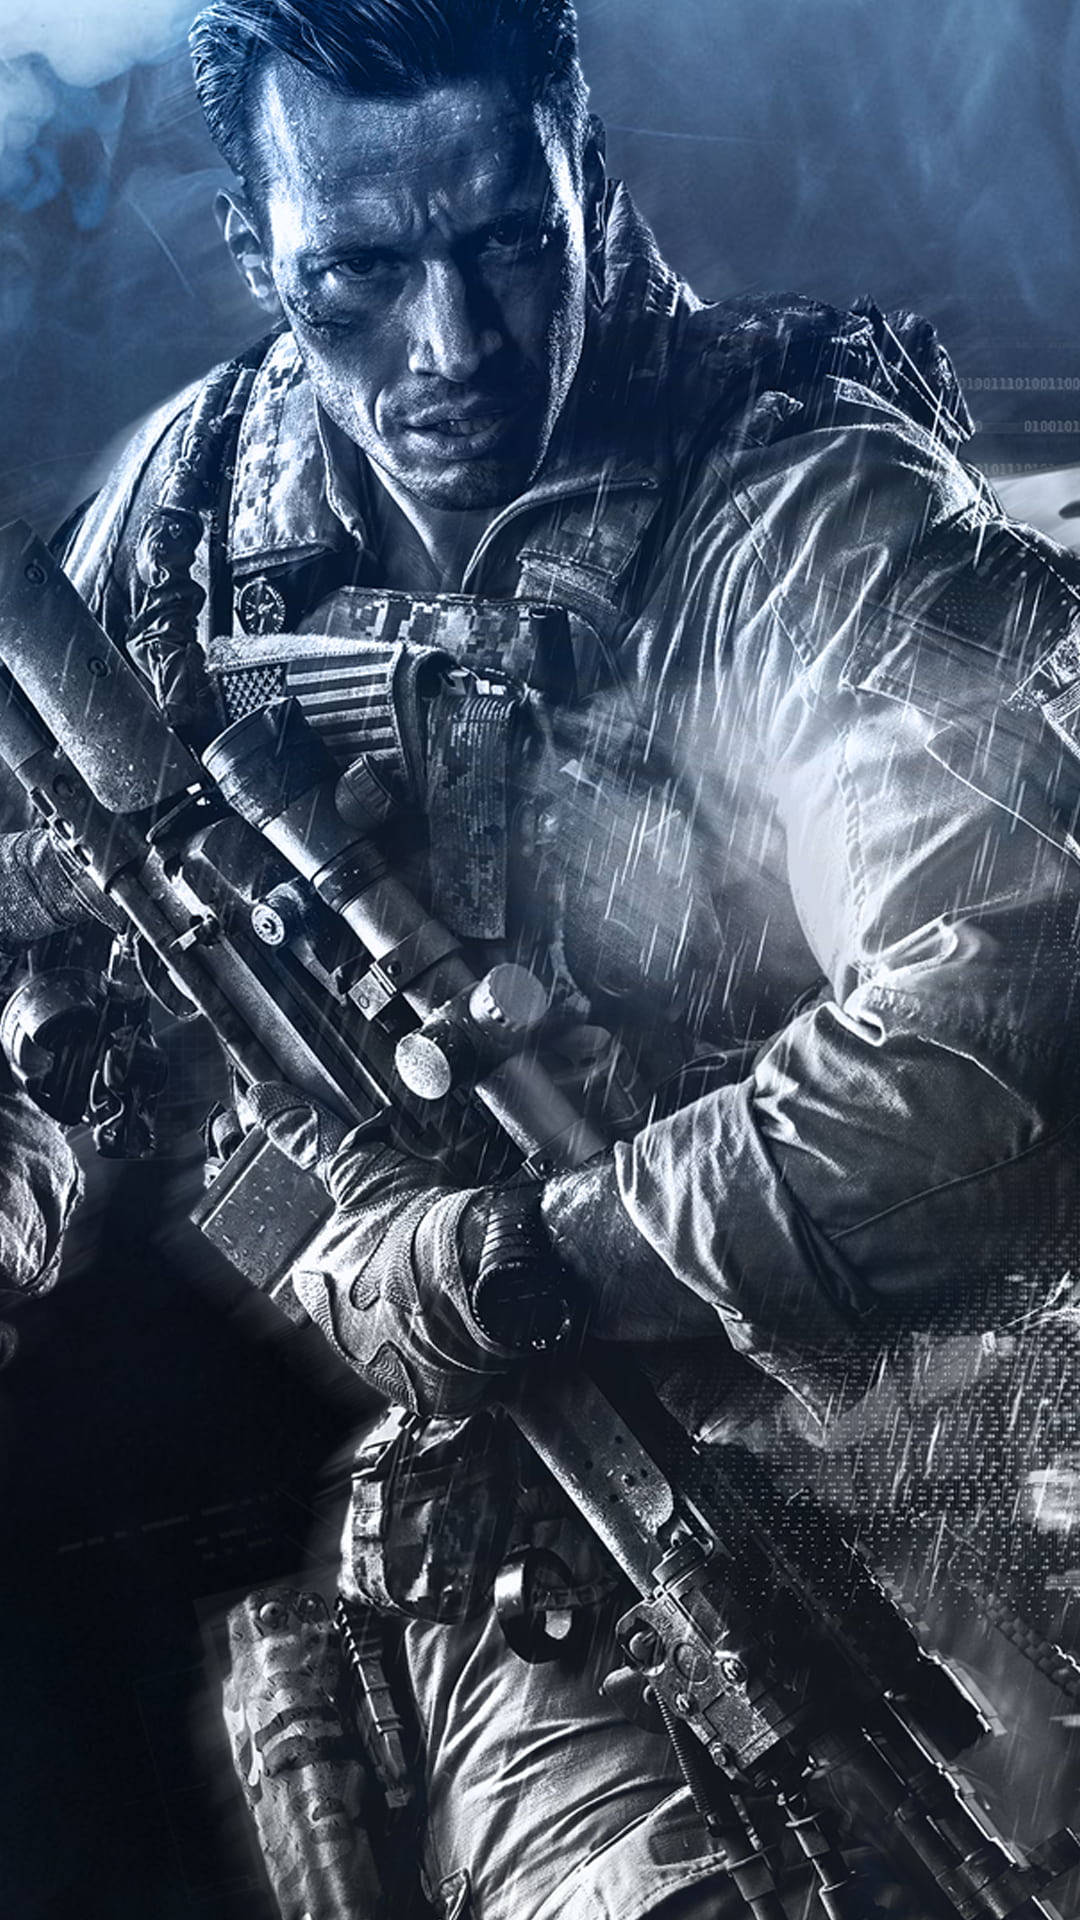 Iconic Battlefield 4 protagonist in action Wallpaper